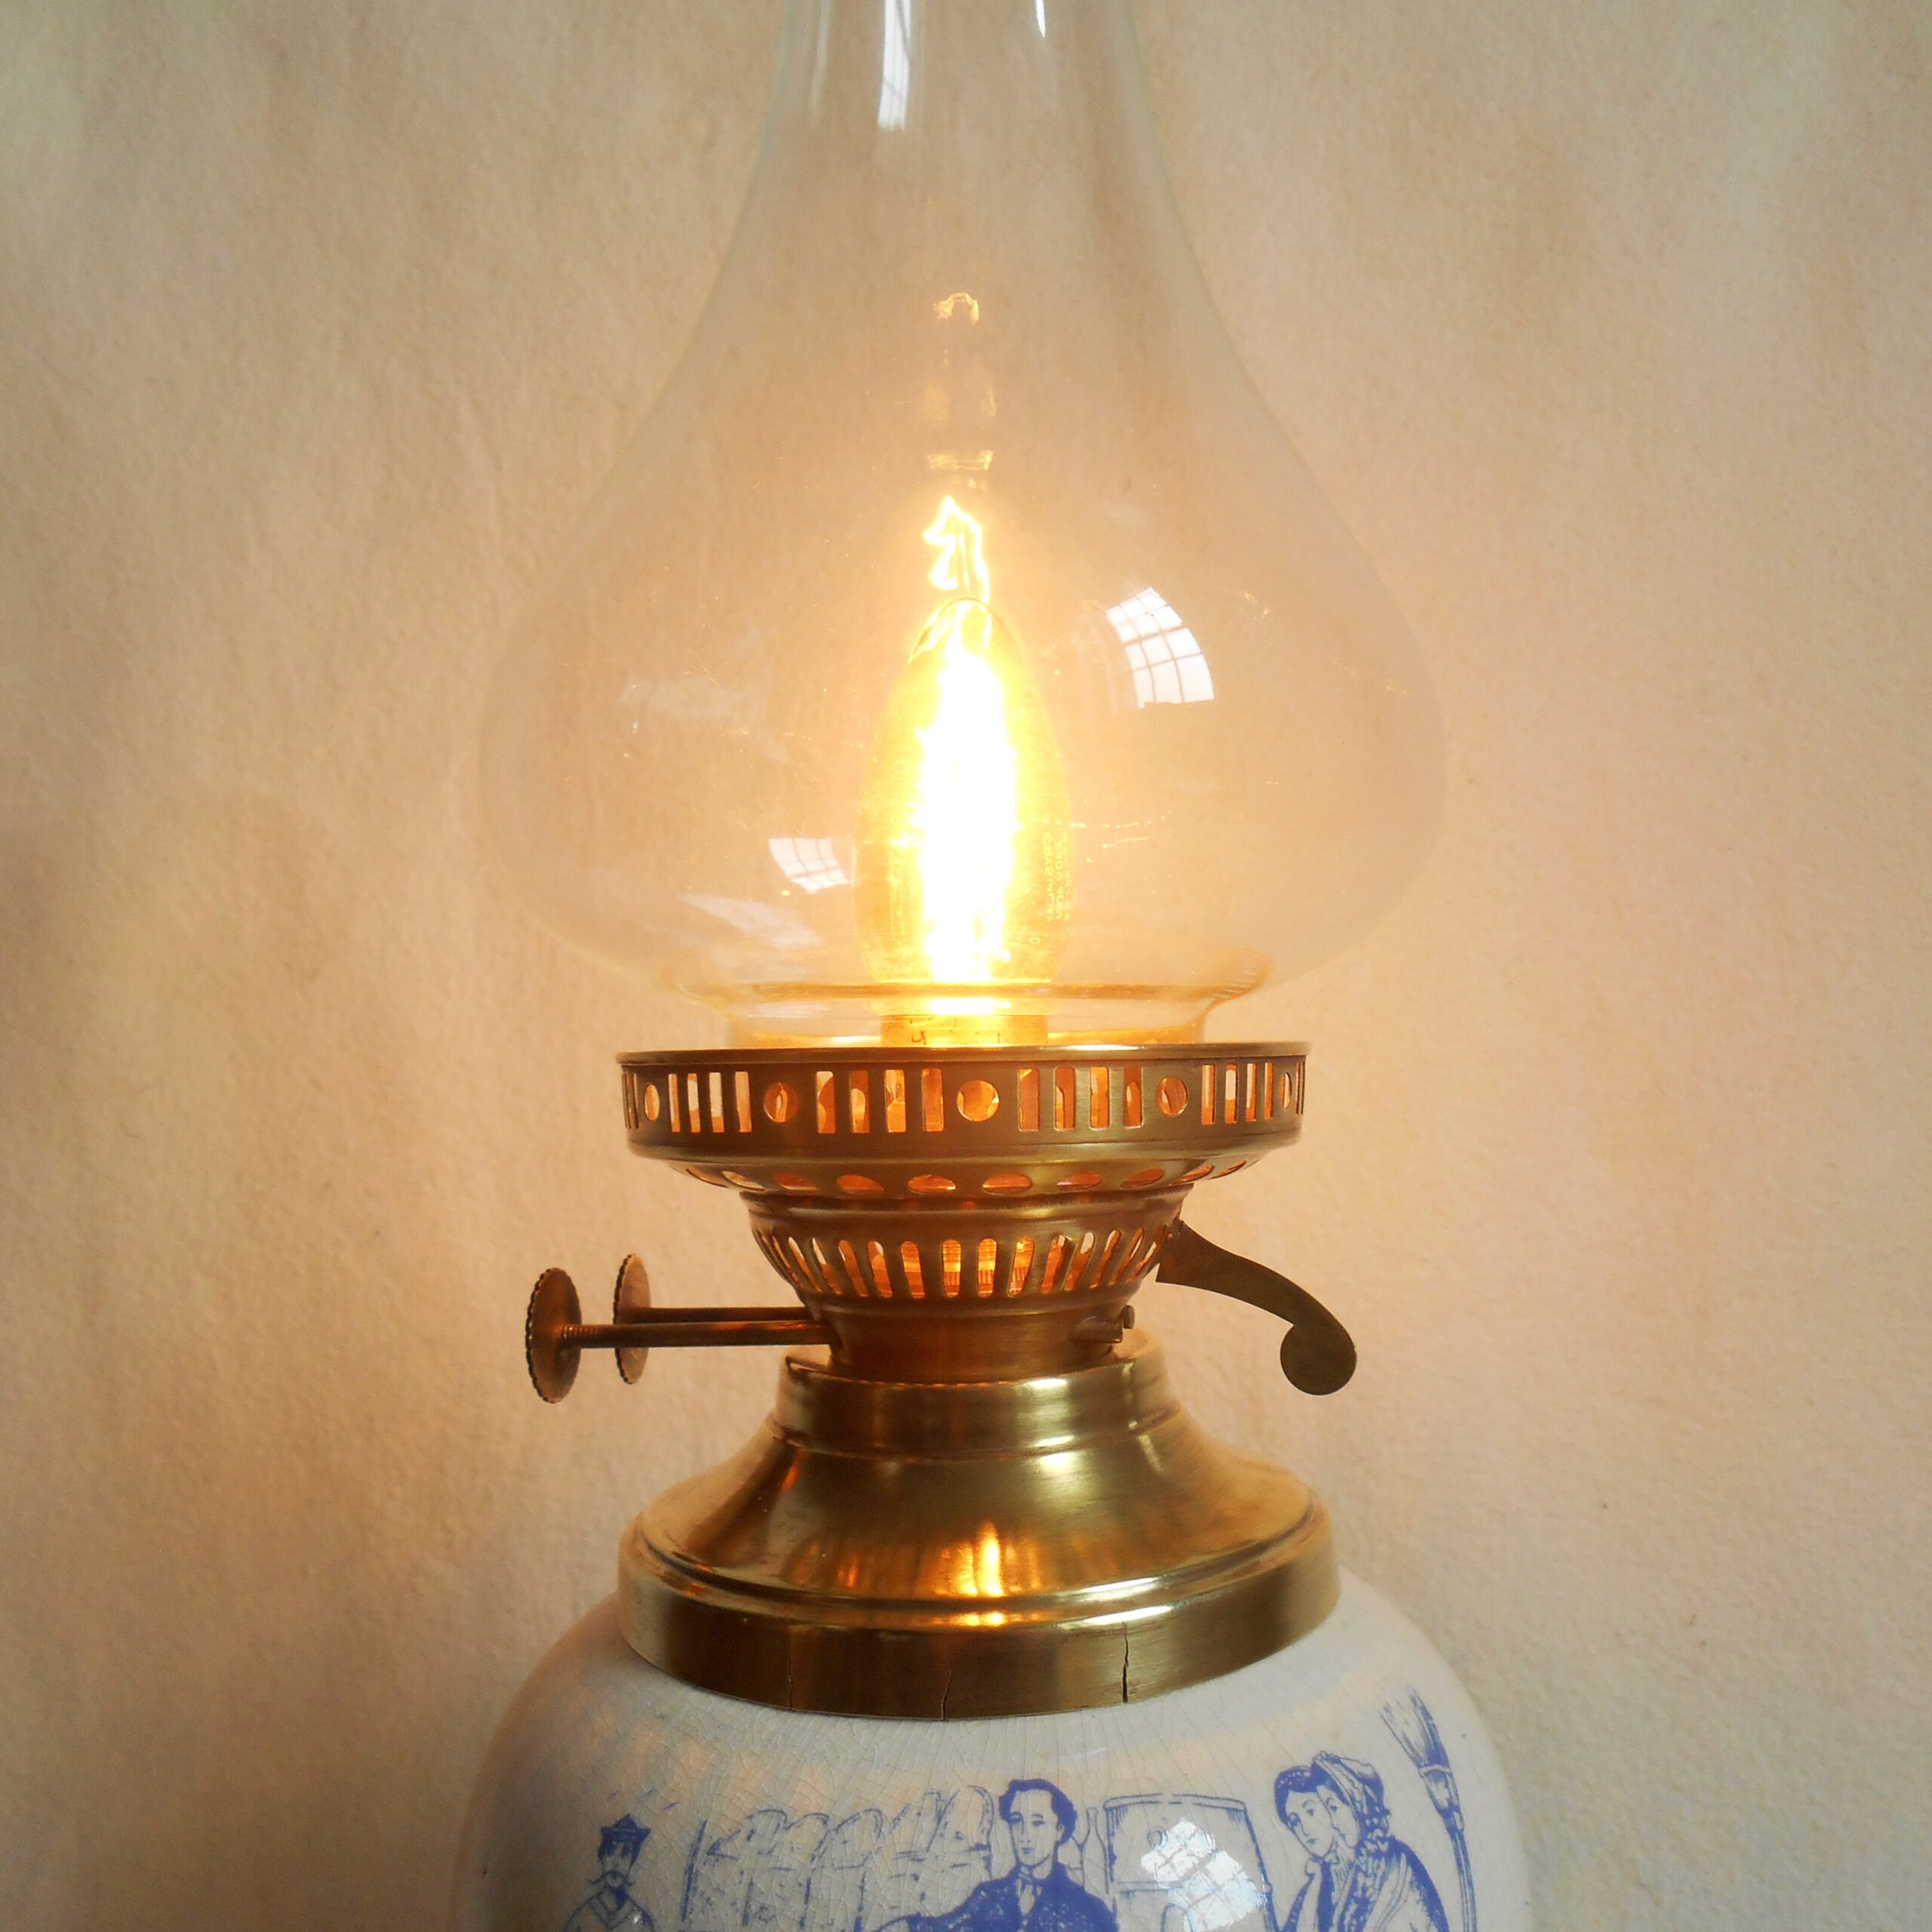 Antique Brass Oil Lamp Converted to Electric with Glass Shade